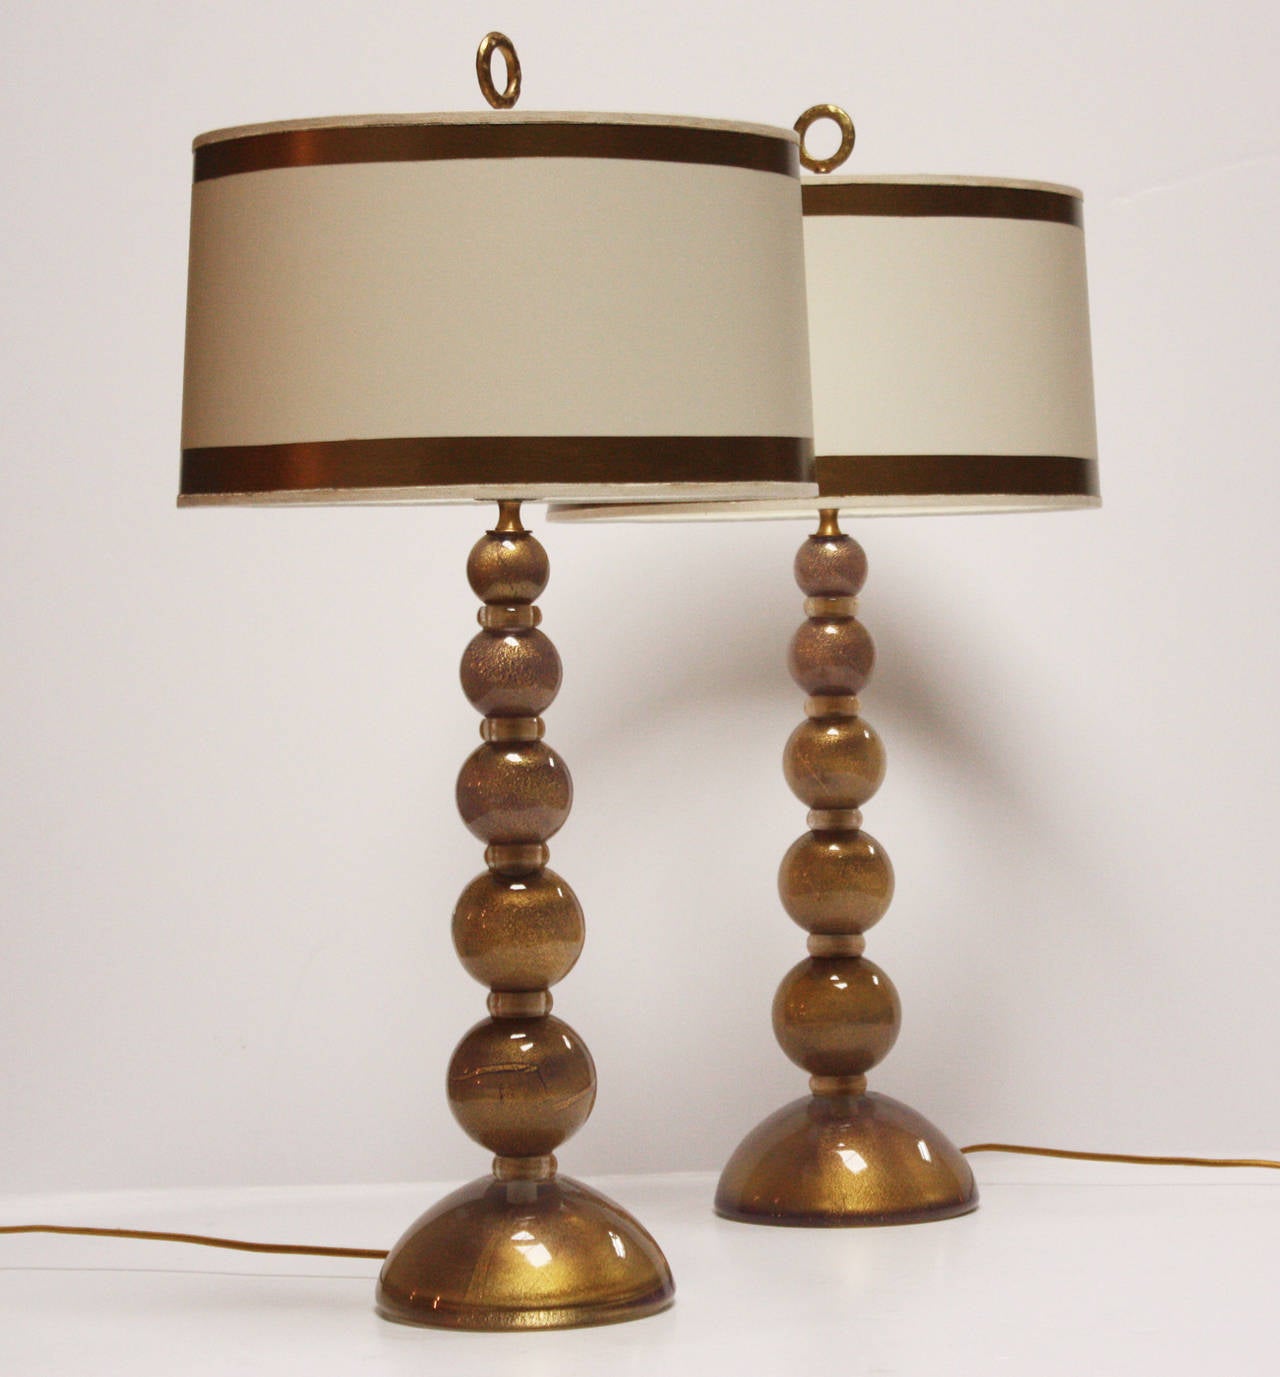 Hand-Crafted Pair of Heavy Gold and Lavender Mid-Century Murano Glass Lamps